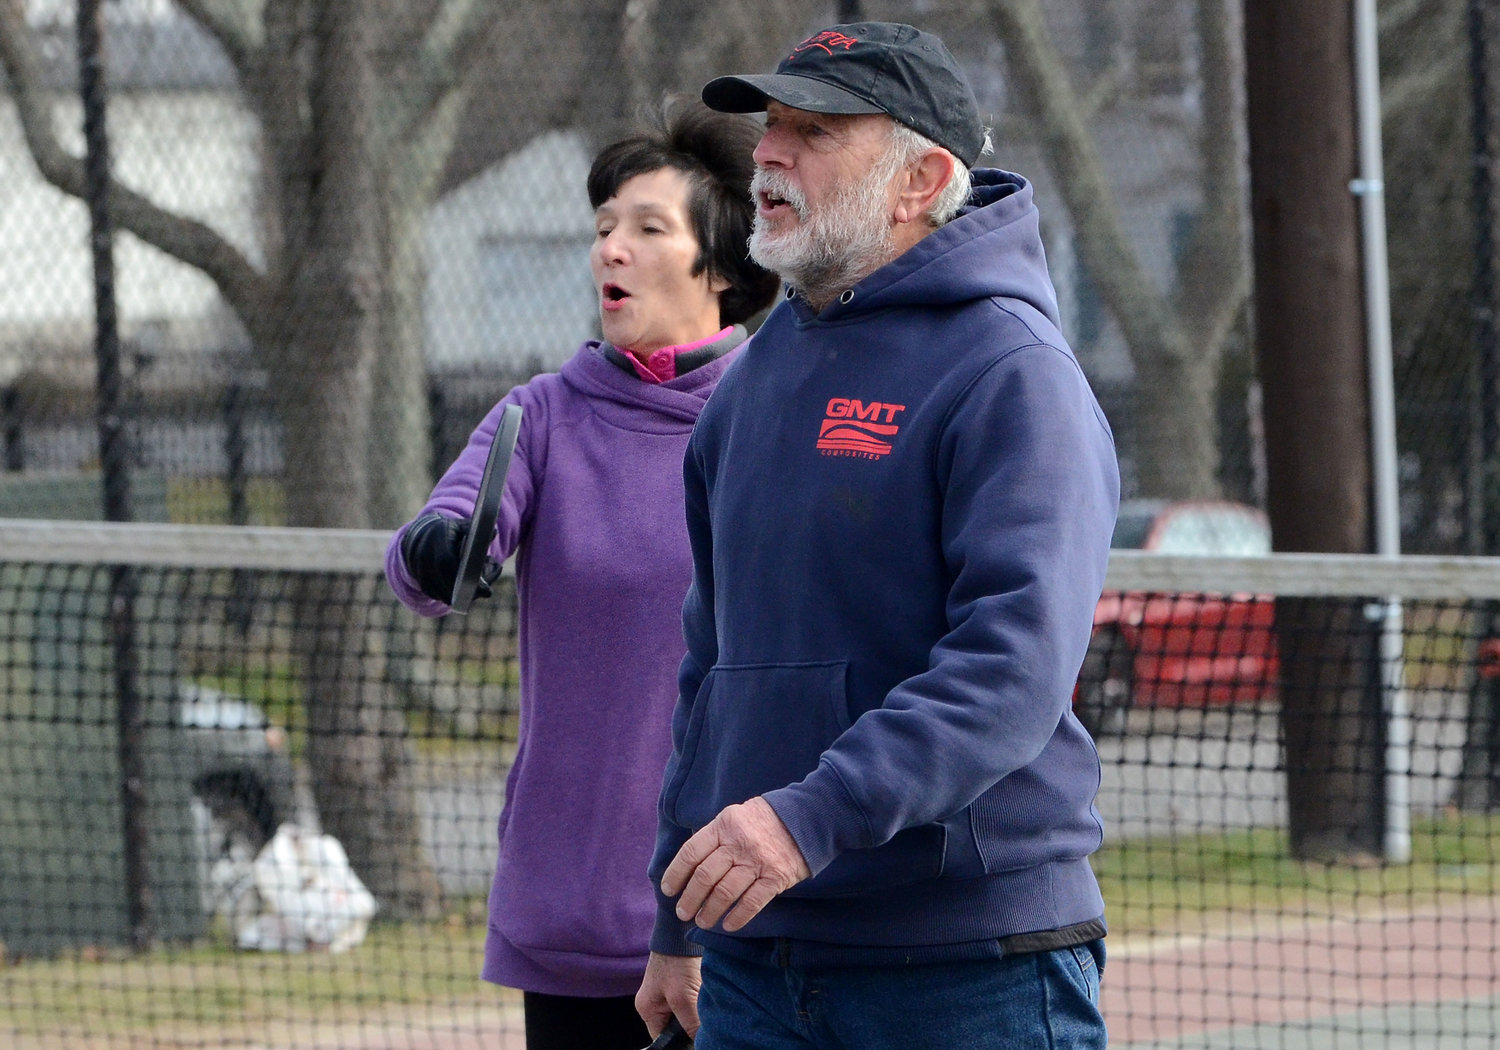 Teammates Eileen Malloy and Peter Maloney react after winning a point.